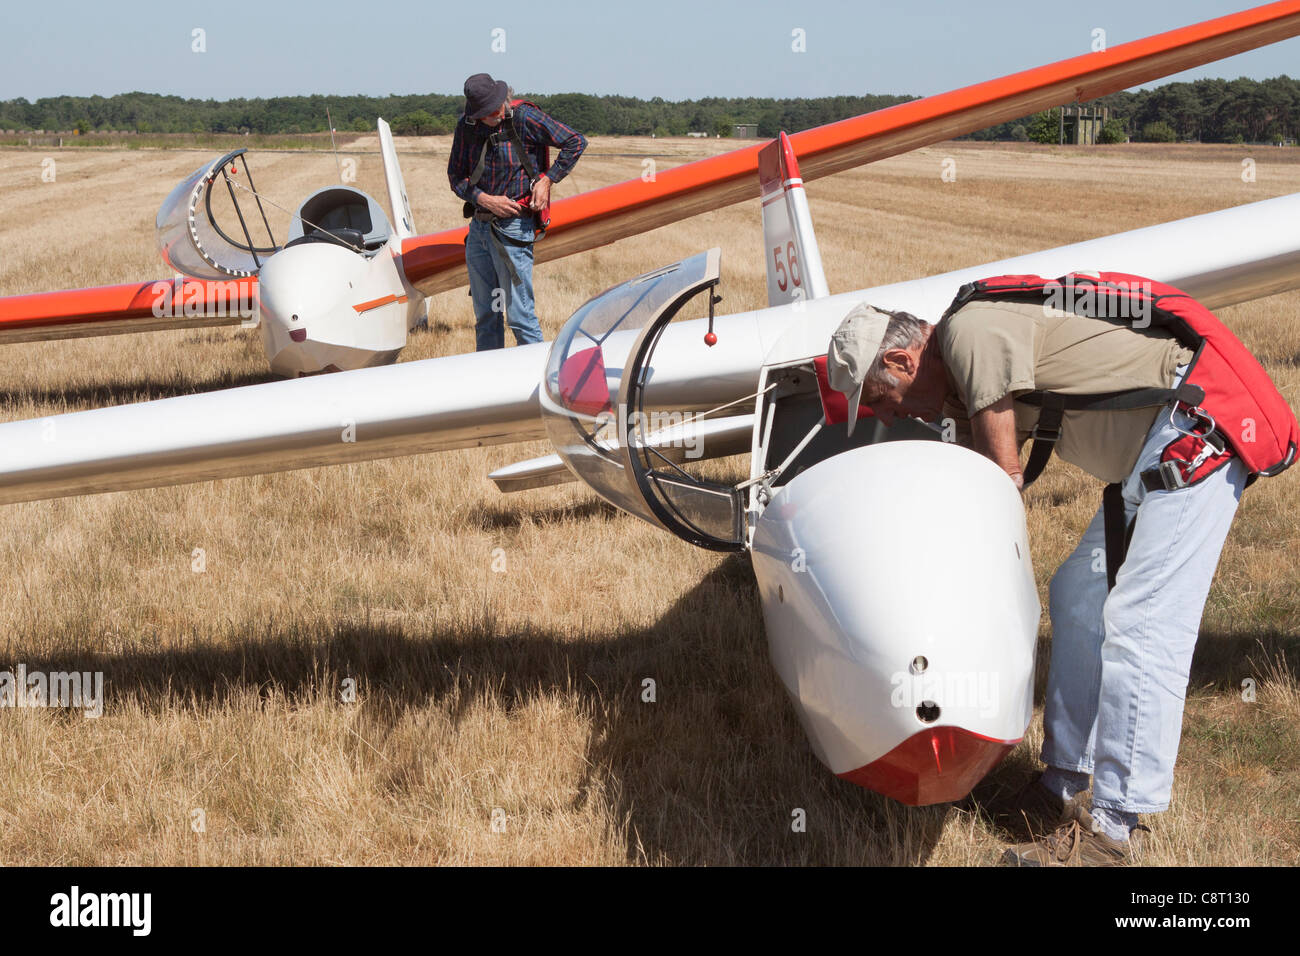 Two glider pilots prepare their aircraft for flight Stock Photo